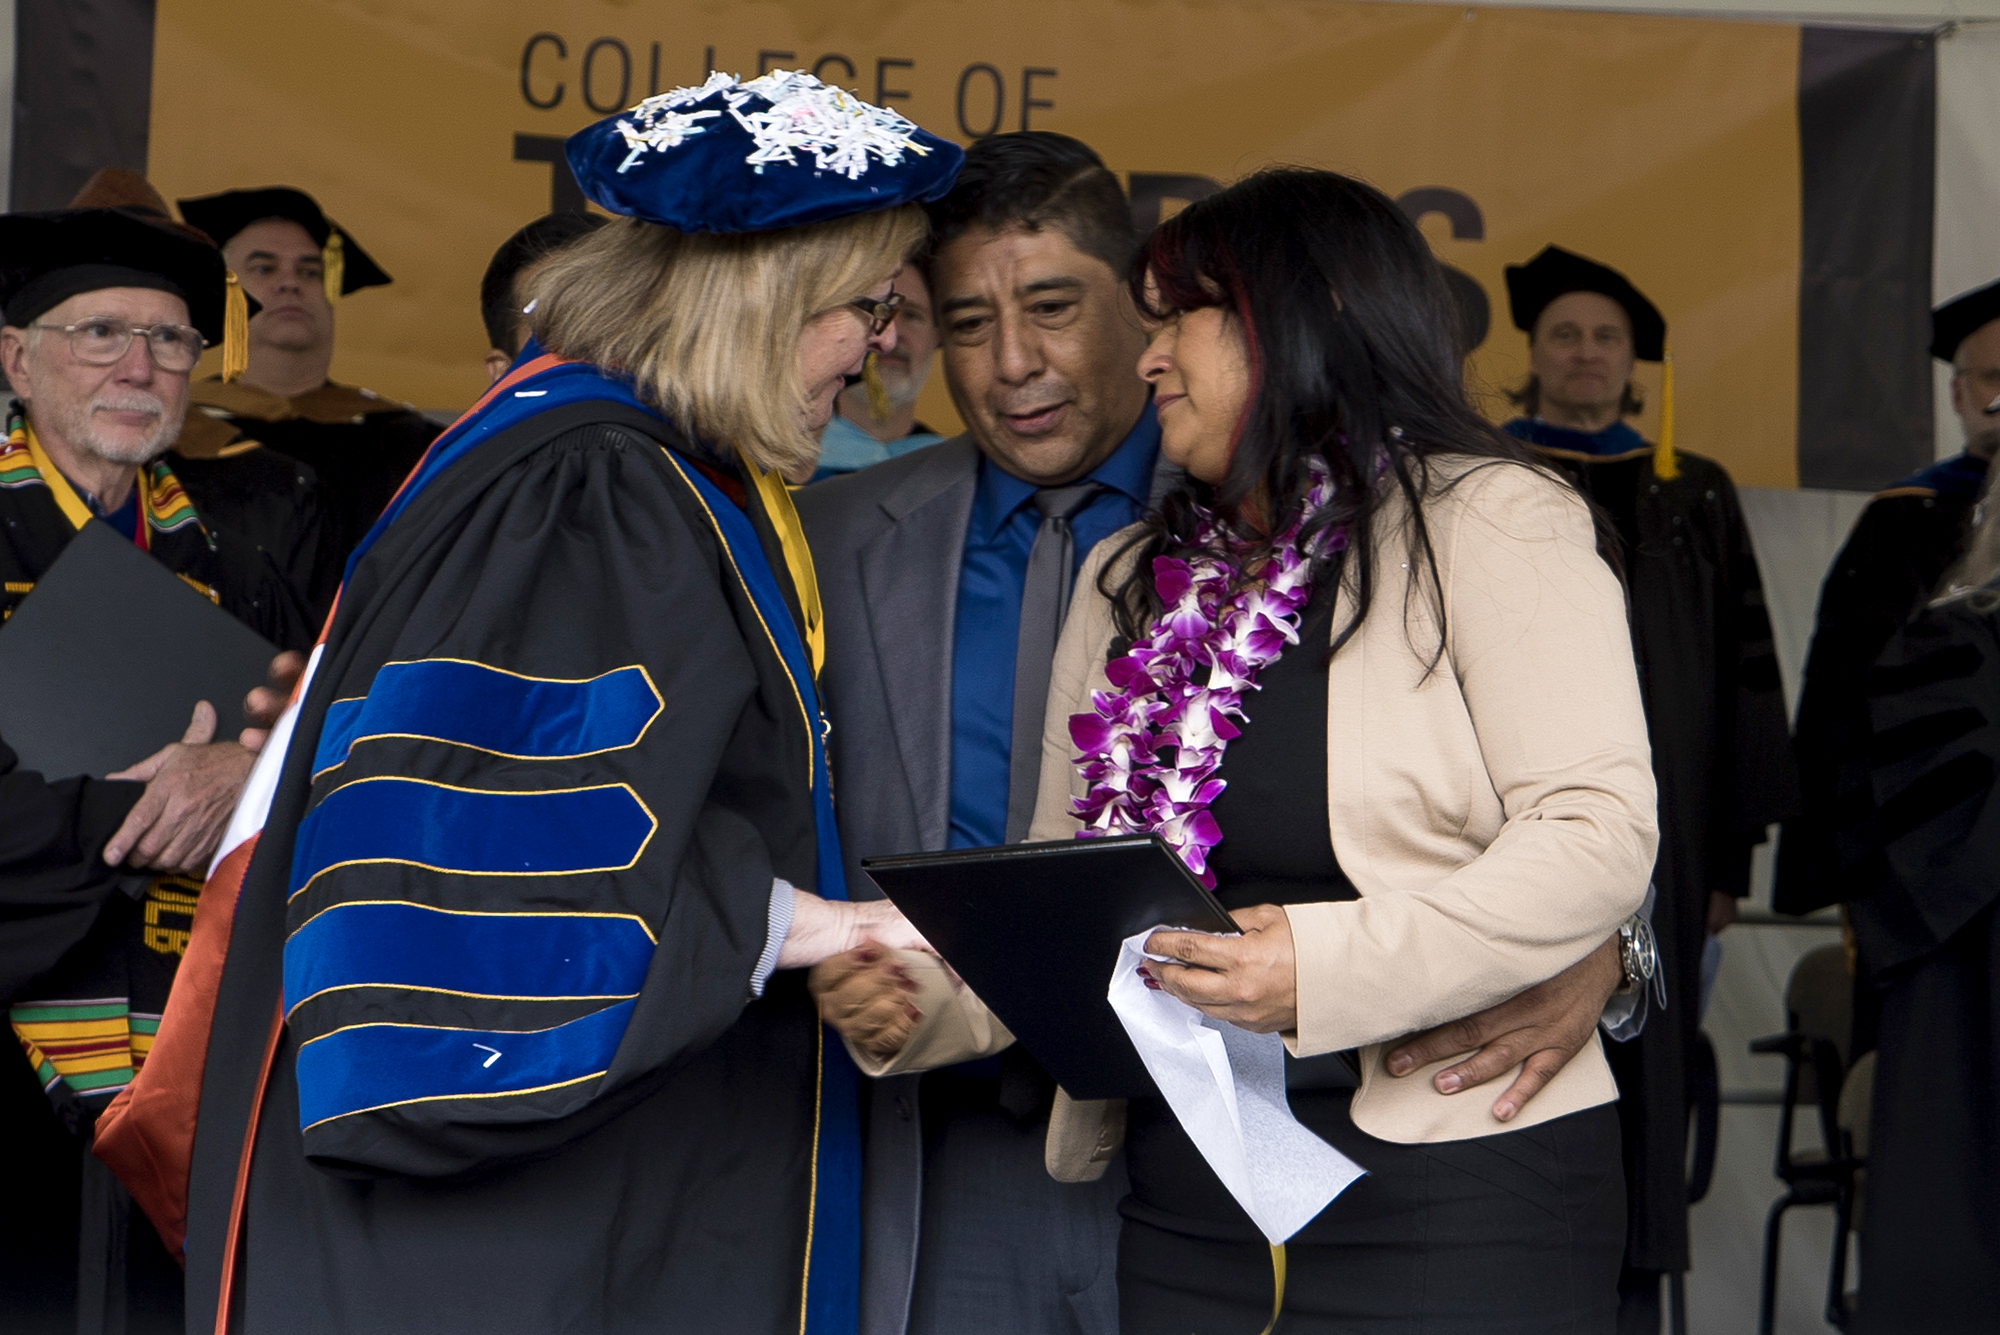 PHOTO: The family of  Nohemi Gonzalez, who was killed in the Paris attacks in November, accepted her degree at California State Unviersity, Long Beach.